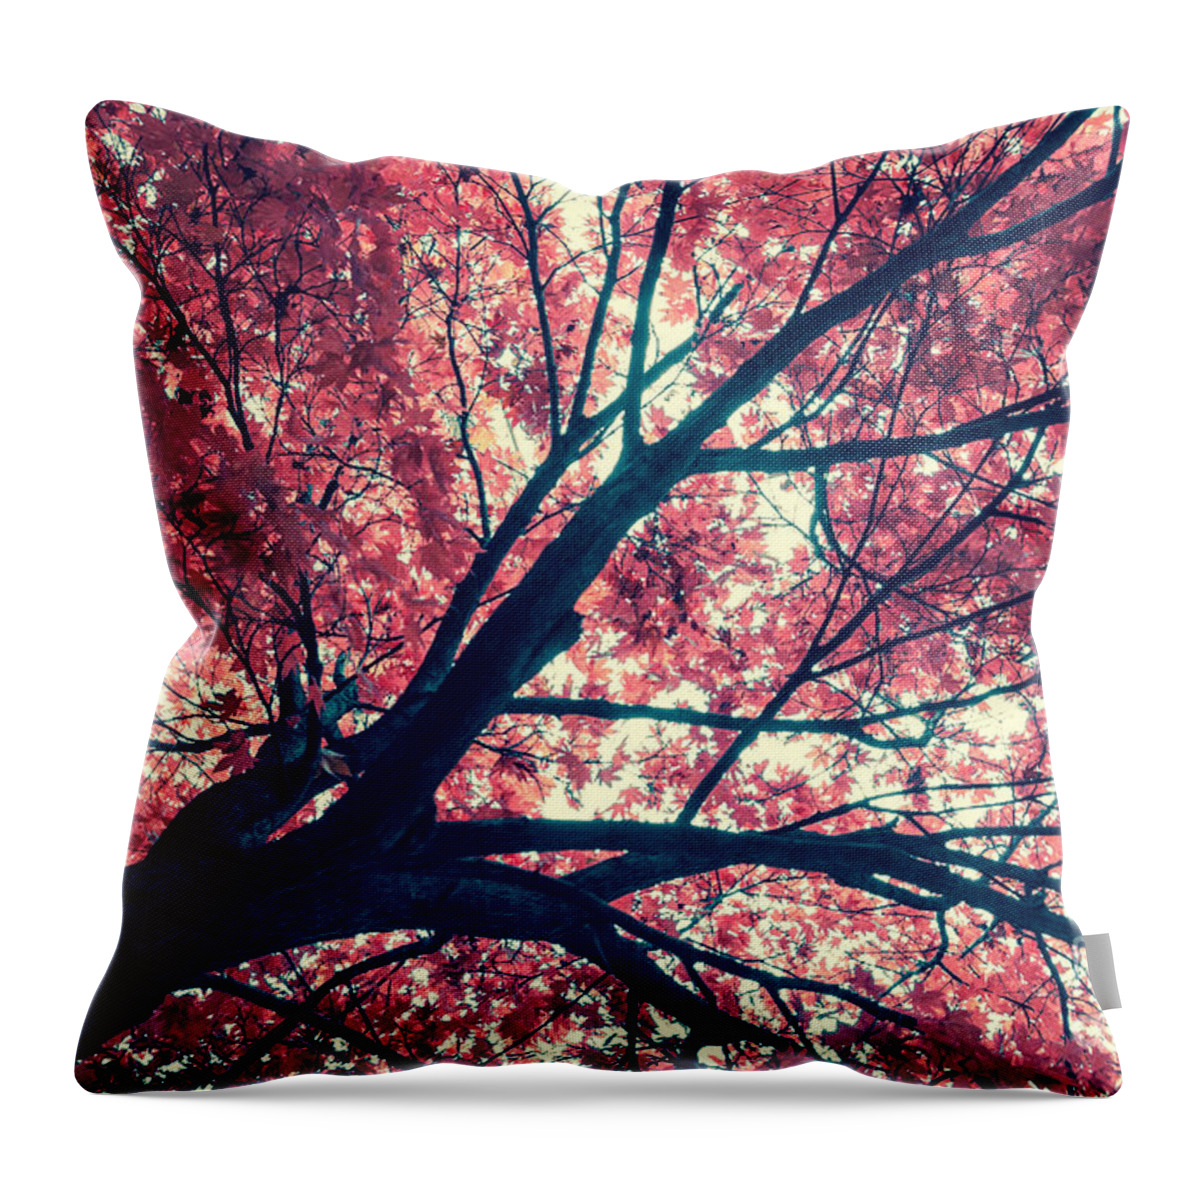 Autumn Throw Pillow featuring the photograph Japanese Maple - Vintage by Hannes Cmarits